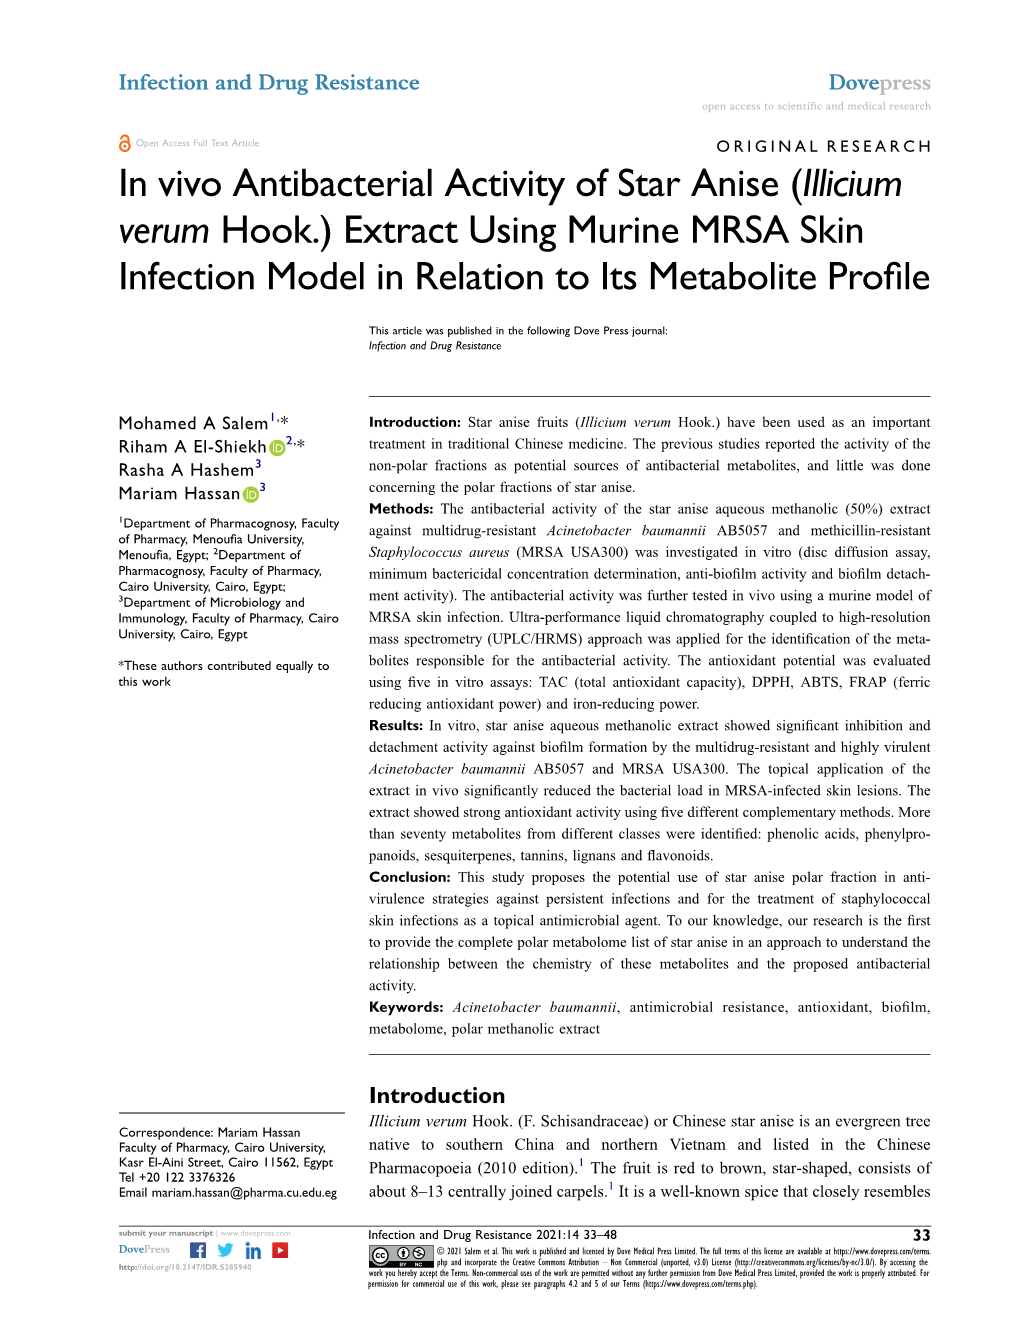 In Vivo Antibacterial Activity of Star Anise (Illicium Verum Hook.) Extract Using Murine MRSA Skin Infection Model in Relation to Its Metabolite Profile